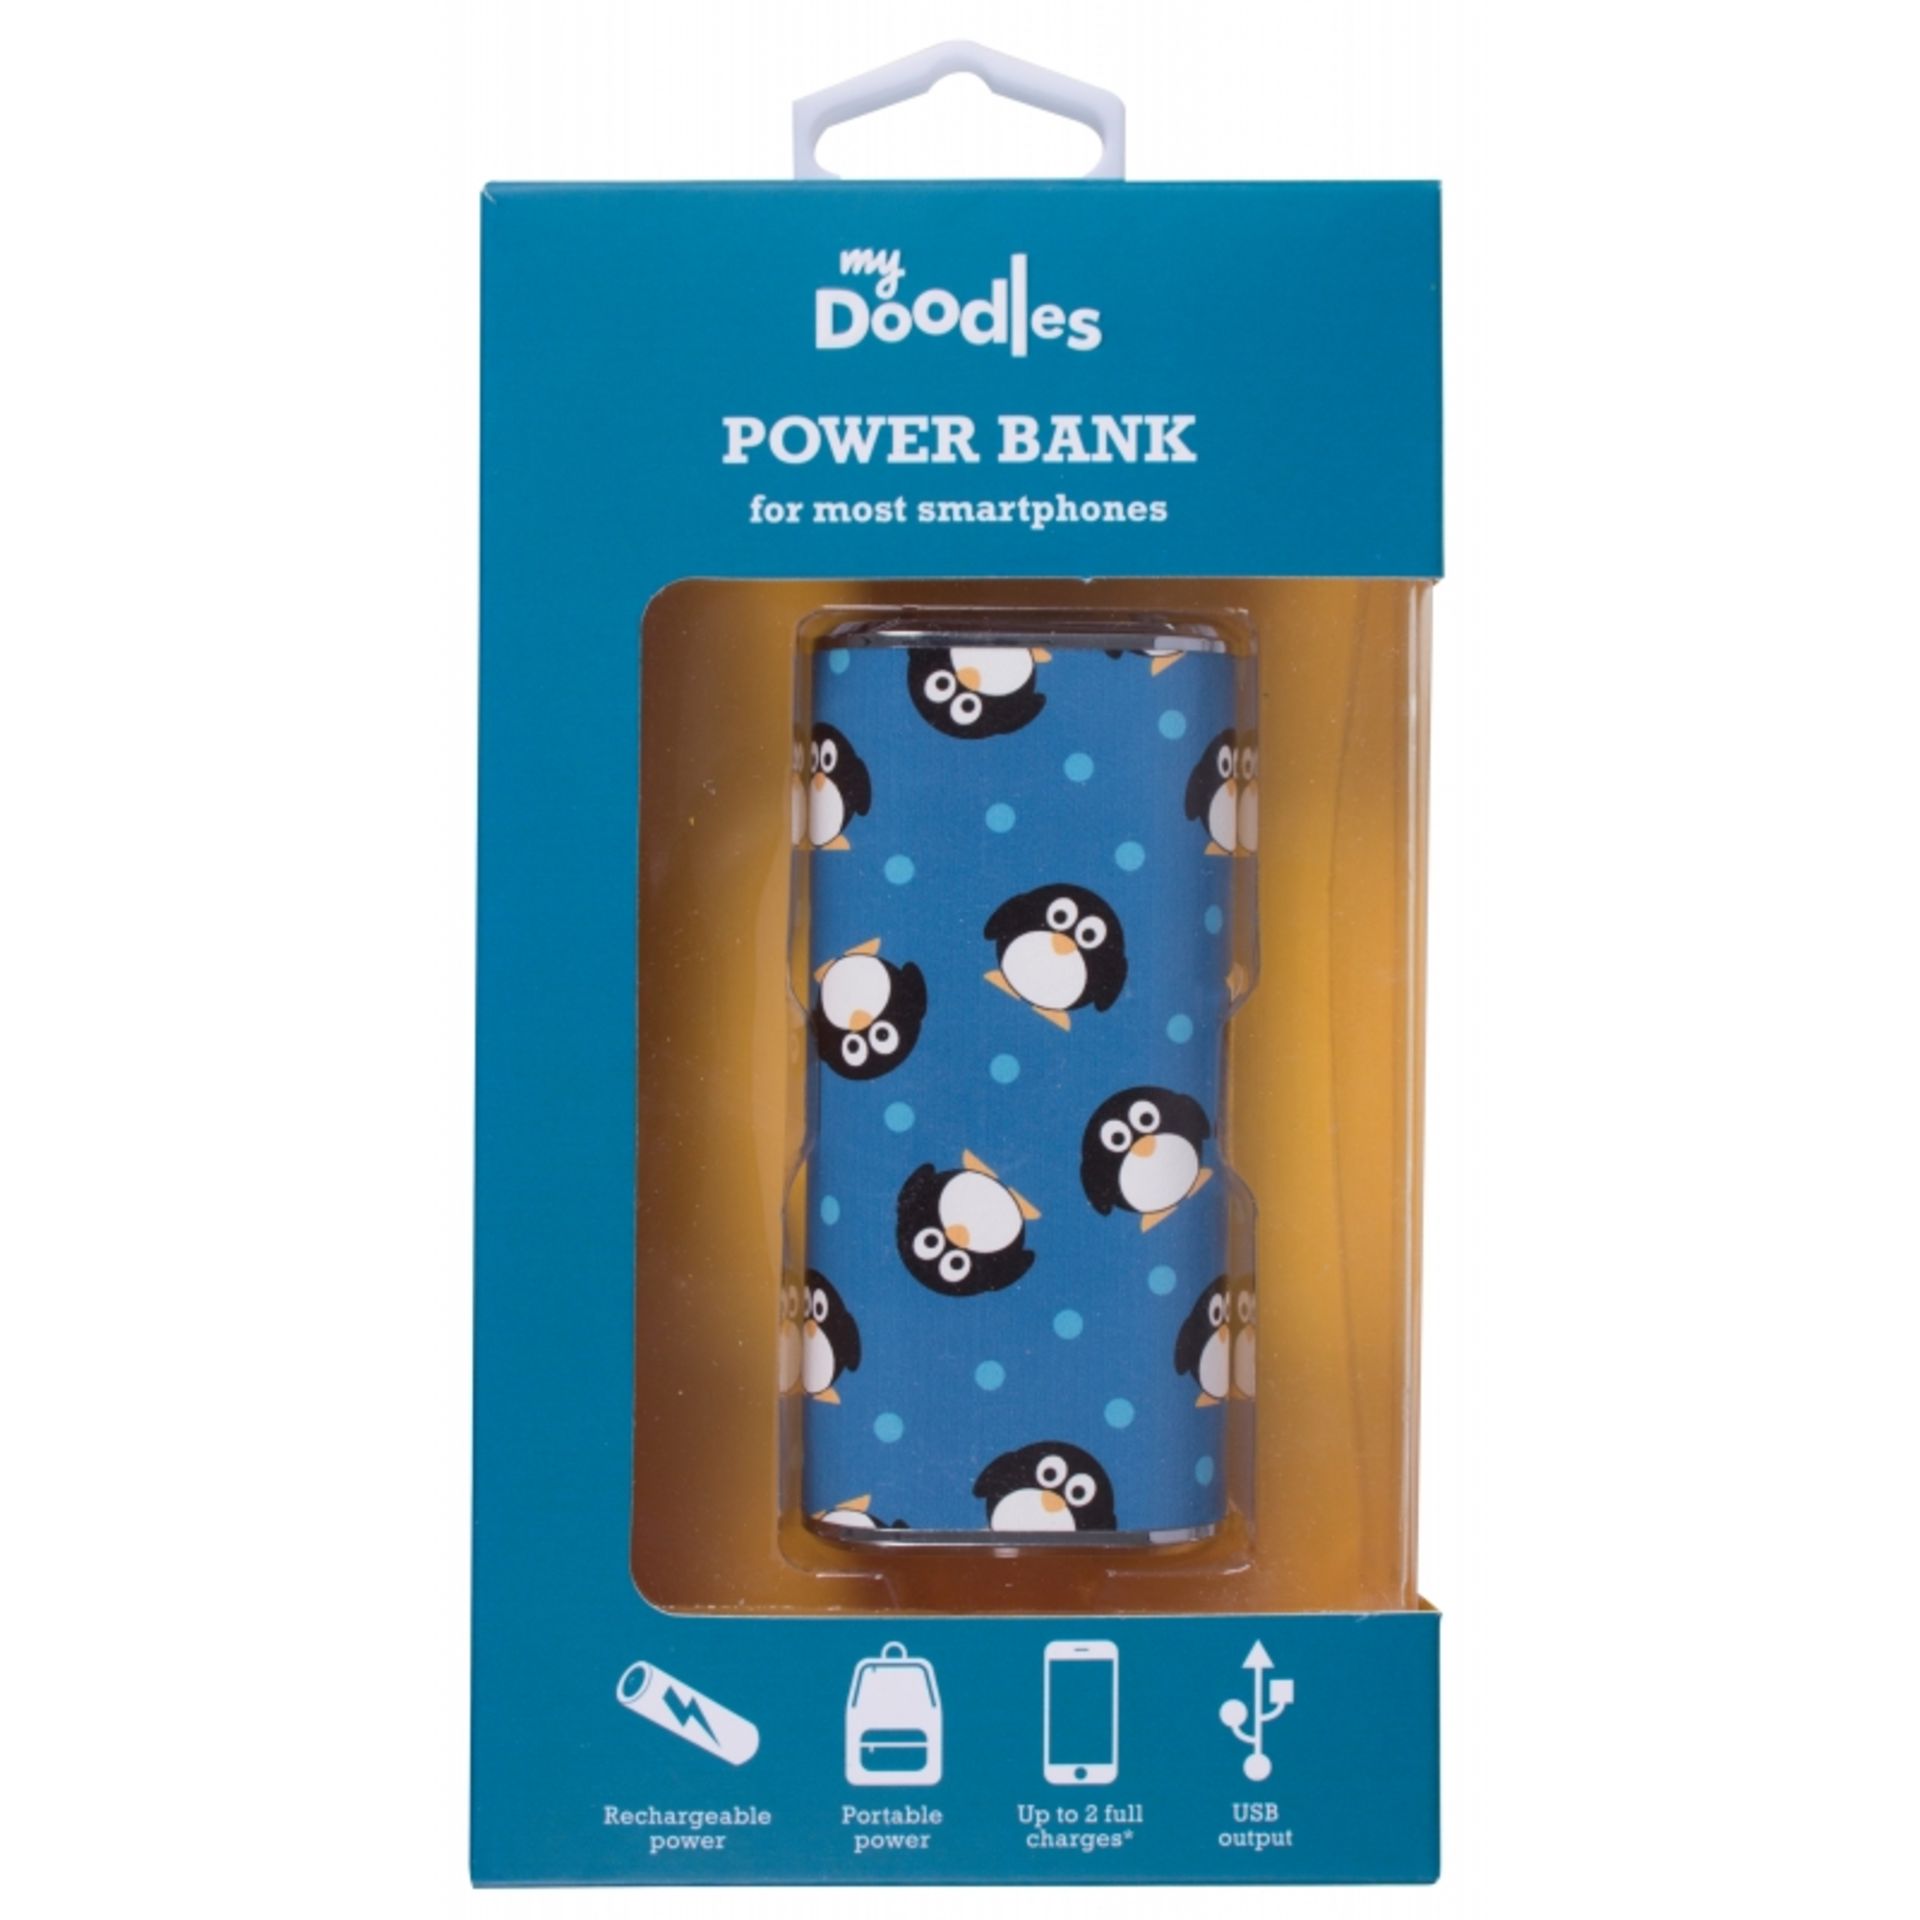 V Brand New My Doodles 4000mAh Universal Power Bank with Built in Torch - ebay price £21.61